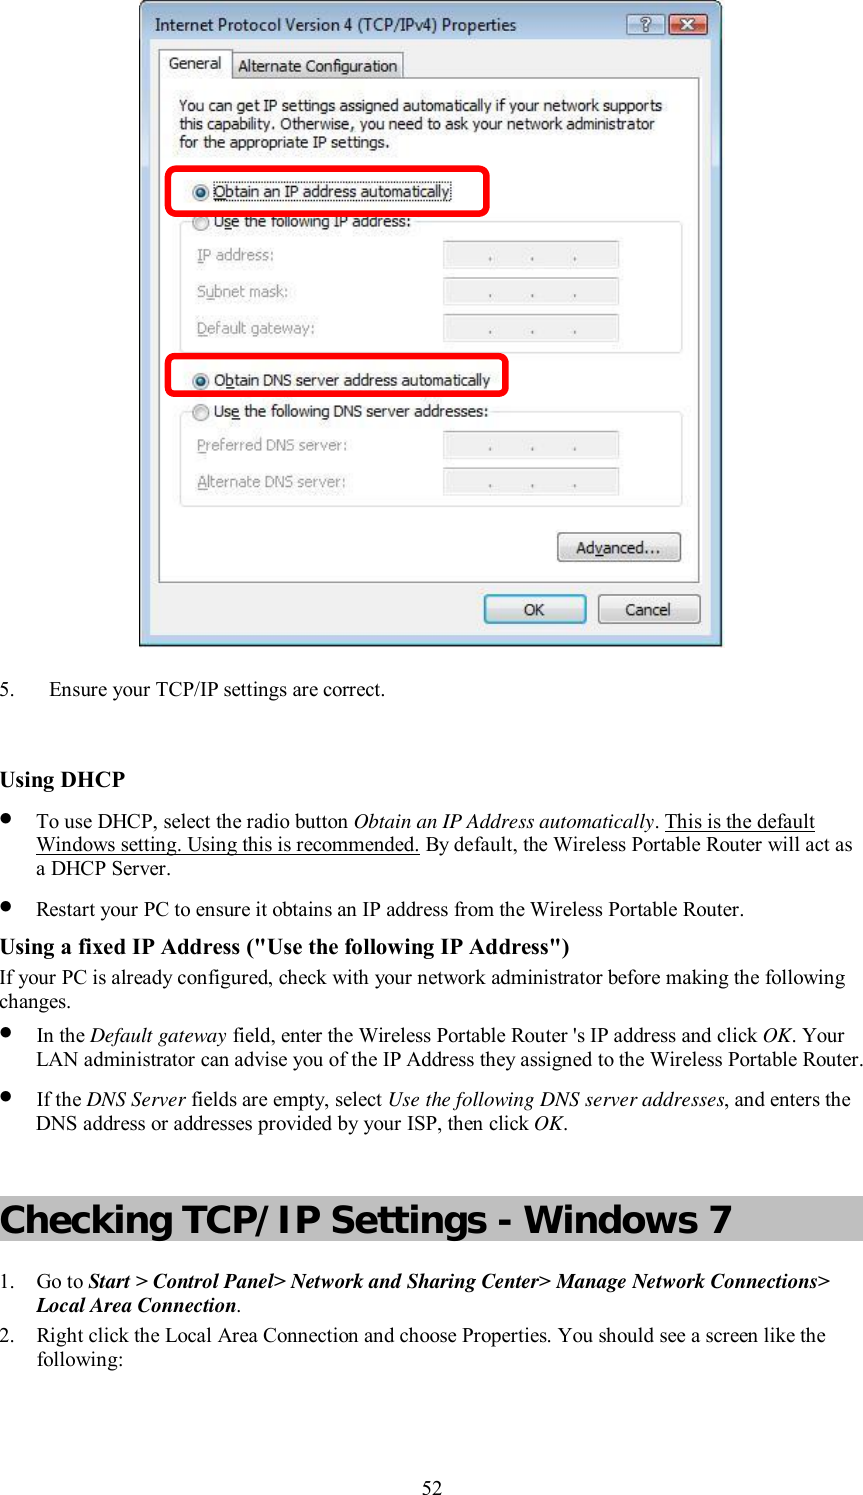    52  5. Ensure your TCP/IP settings are correct.  Using DHCP • To use DHCP, select the radio button Obtain an IP Address automatically. This is the default Windows setting. Using this is recommended. By default, the Wireless Portable Router will act as a DHCP Server. • Restart your PC to ensure it obtains an IP address from the Wireless Portable Router. Using a fixed IP Address (&quot;Use the following IP Address&quot;) If your PC is already configured, check with your network administrator before making the following changes. • In the Default gateway field, enter the Wireless Portable Router &apos;s IP address and click OK. Your LAN administrator can advise you of the IP Address they assigned to the Wireless Portable Router. • If the DNS Server fields are empty, select Use the following DNS server addresses, and enters the DNS address or addresses provided by your ISP, then click OK.  Checking TCP/IP Settings - Windows 7 1. Go to Start &gt; Control Panel&gt; Network and Sharing Center&gt; Manage Network Connections&gt; Local Area Connection. 2. Right click the Local Area Connection and choose Properties. You should see a screen like the following: 